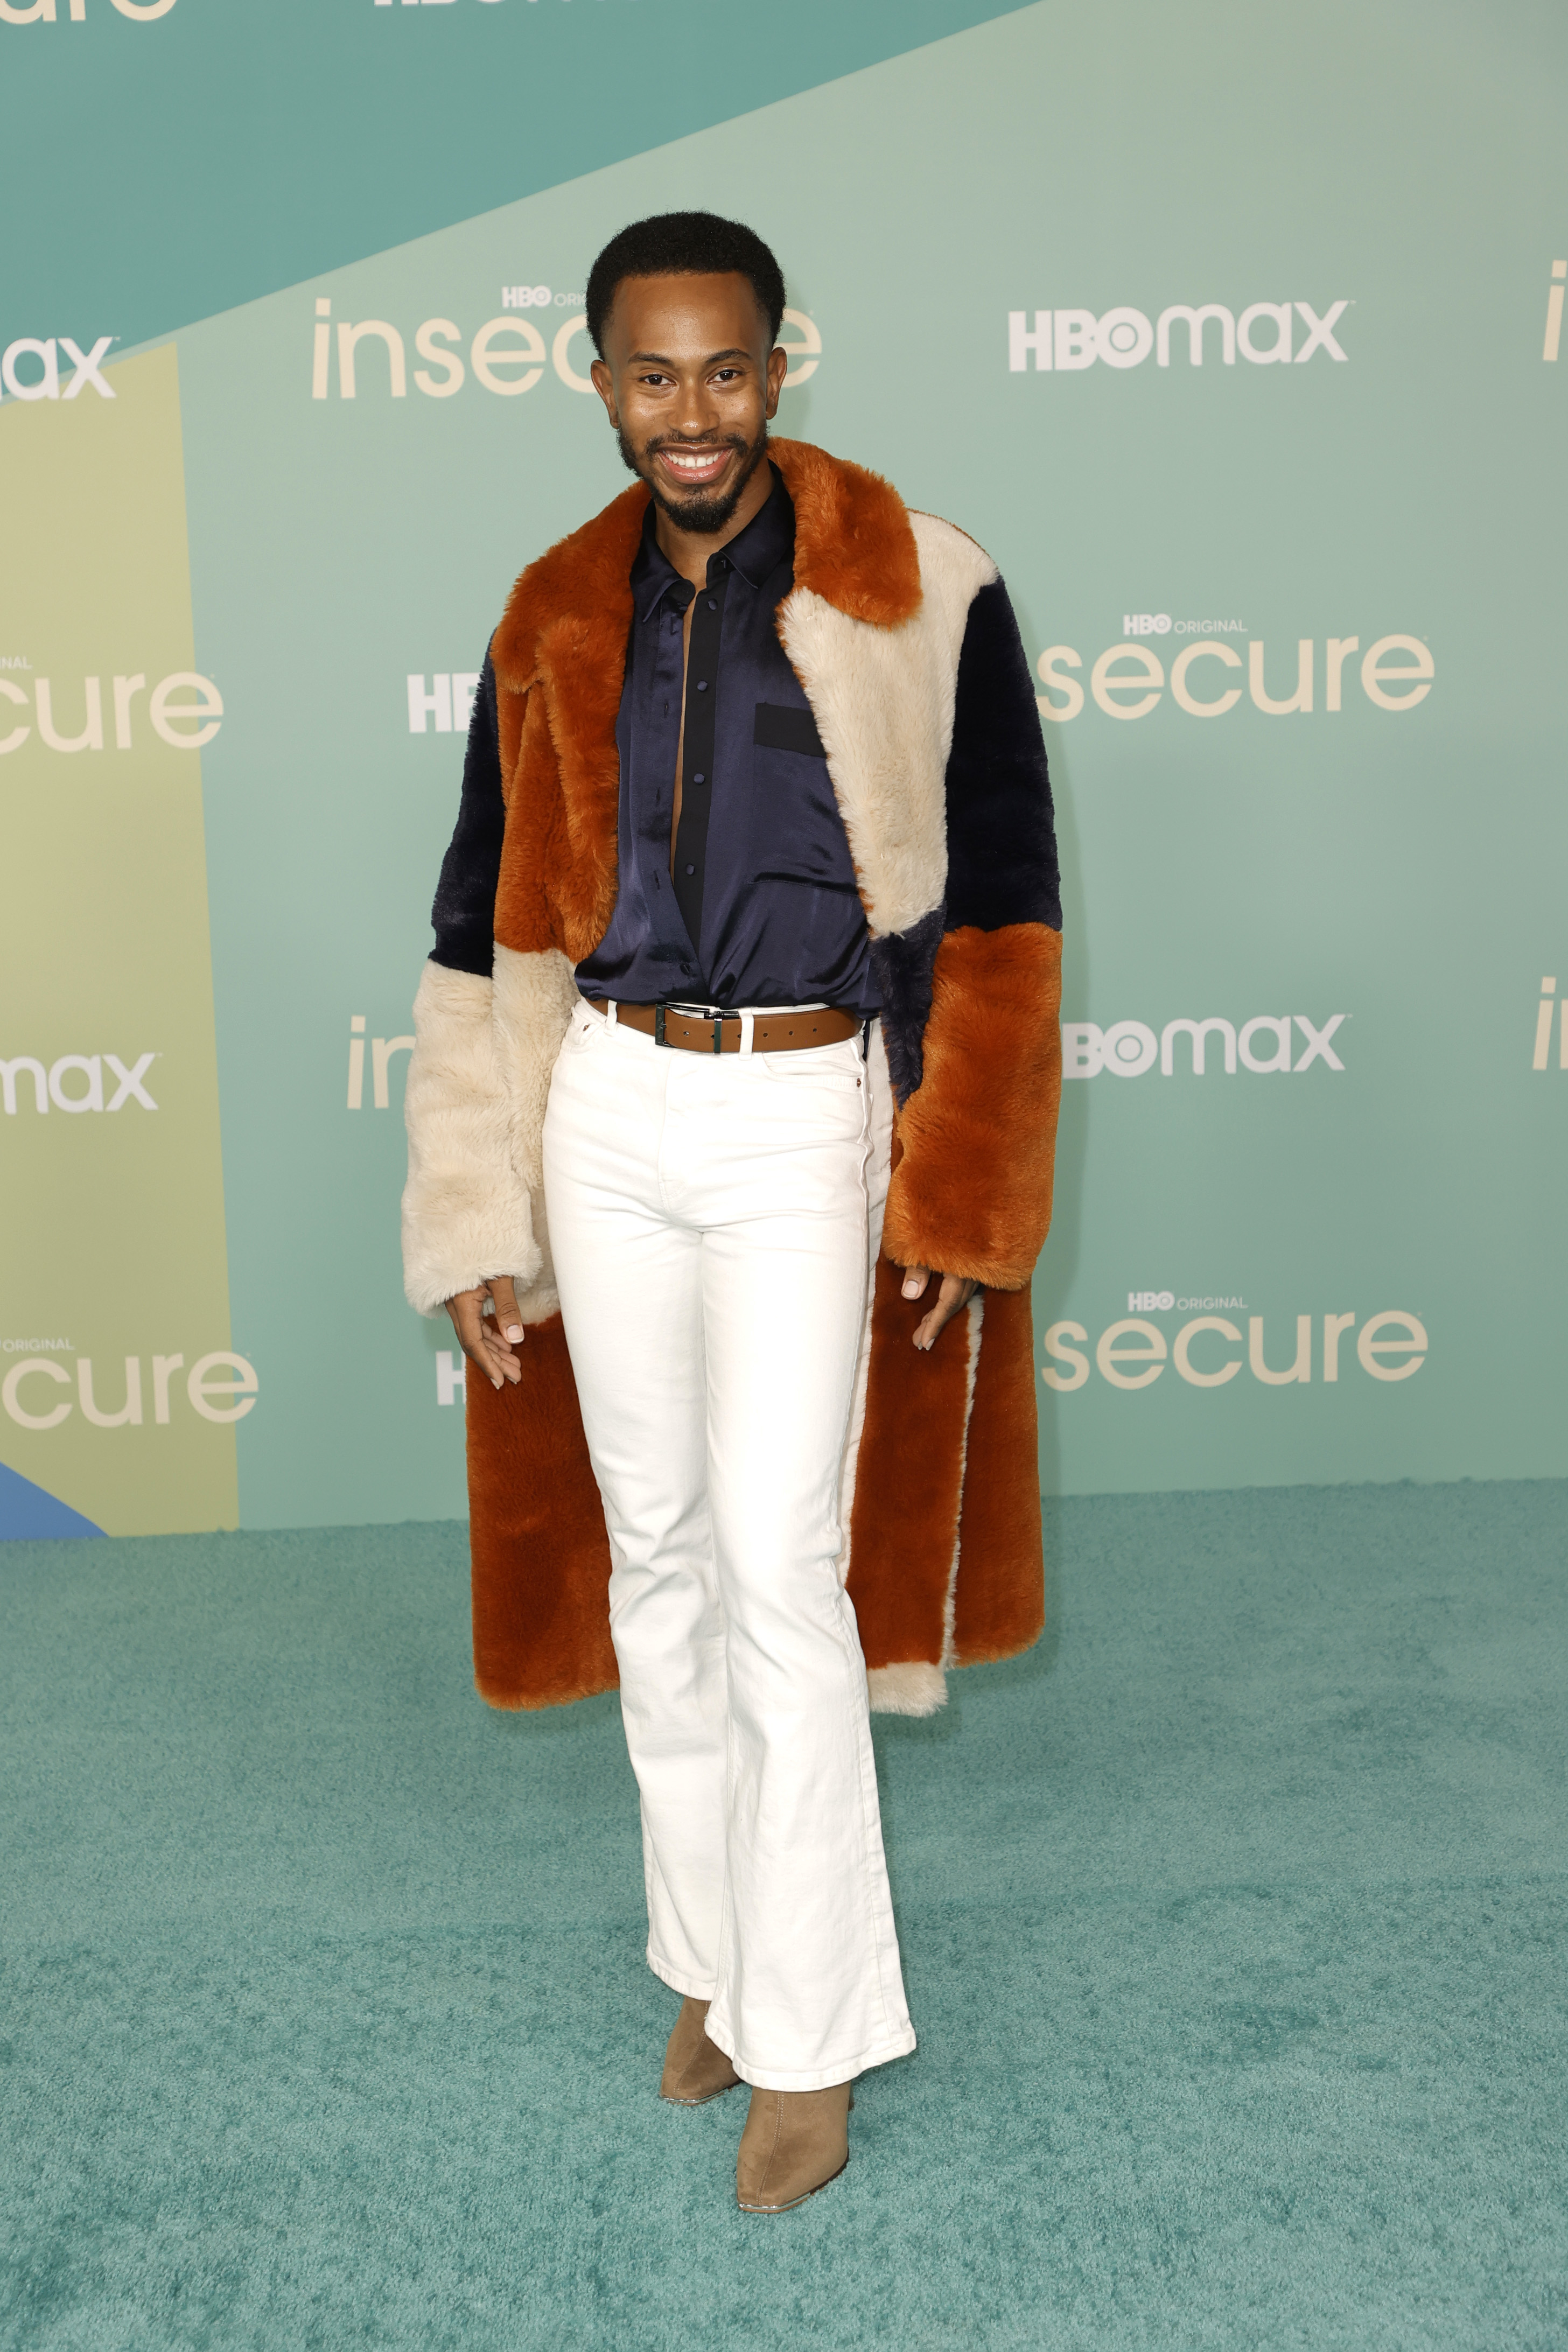 Kalen Allen smiles for the camera at a media event while wearing a shearling coat